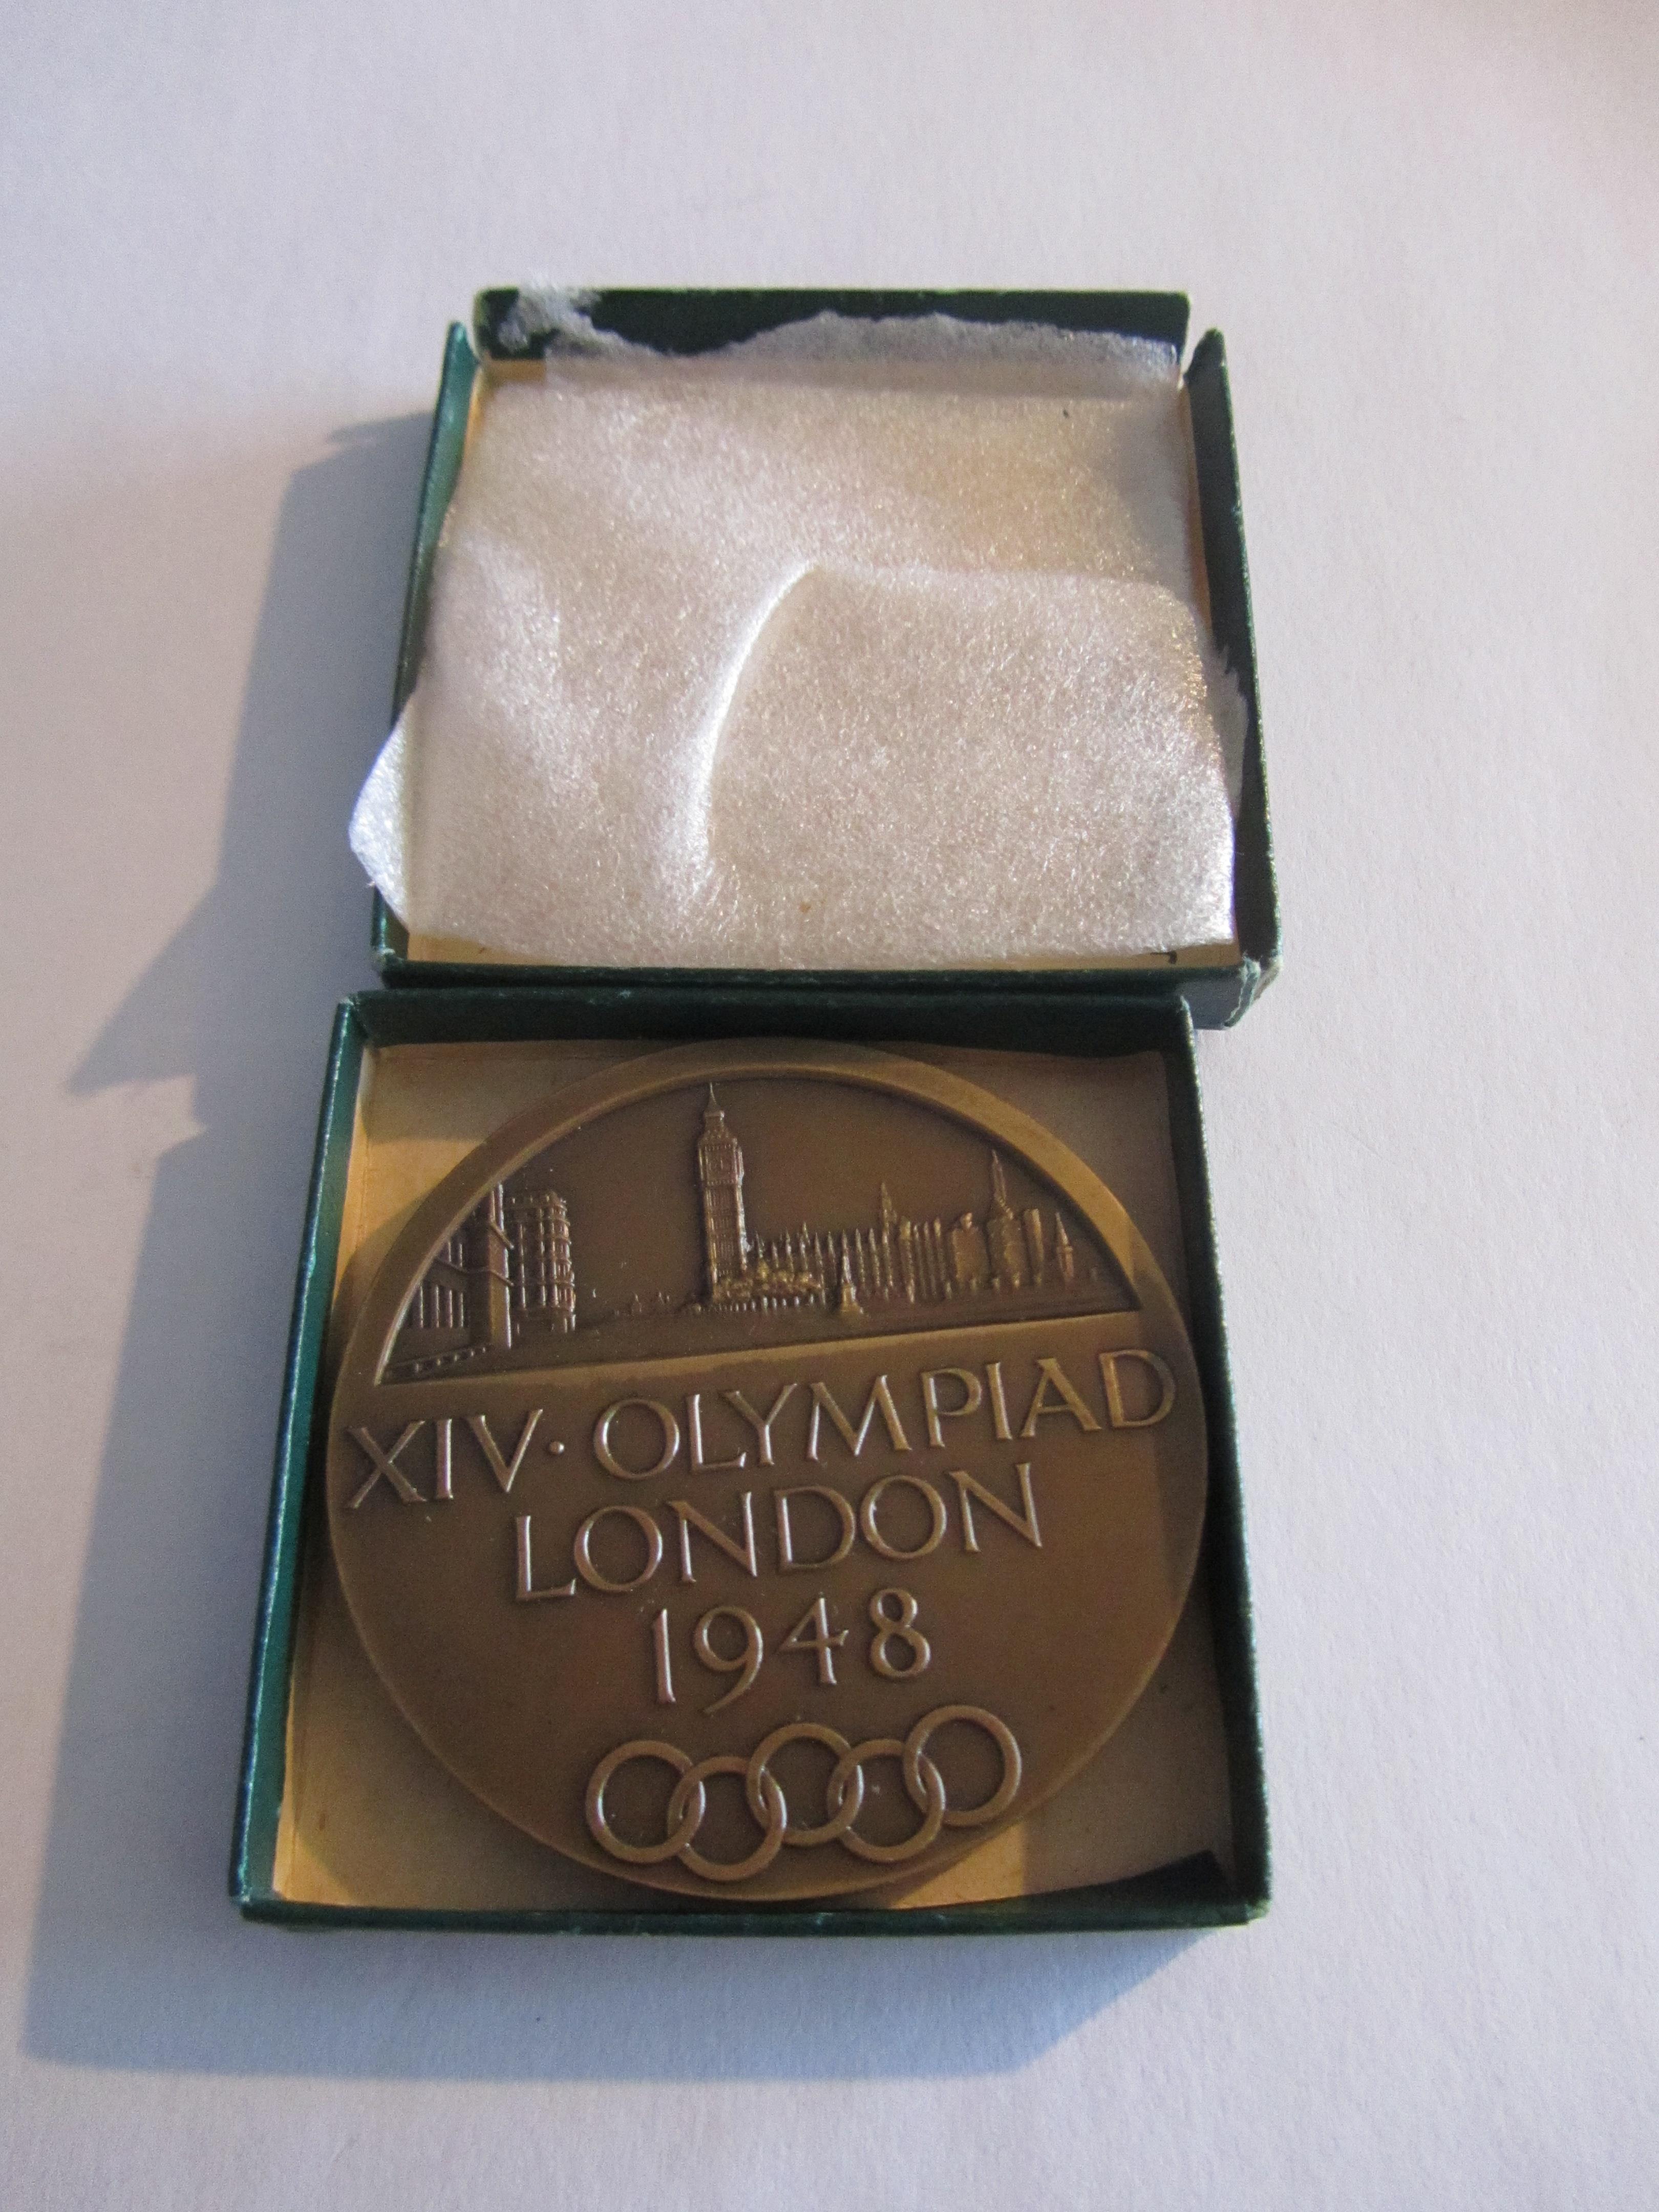 London 1948 London Olympic Games participant's medal, designed by B Mackennal, - Image 2 of 6